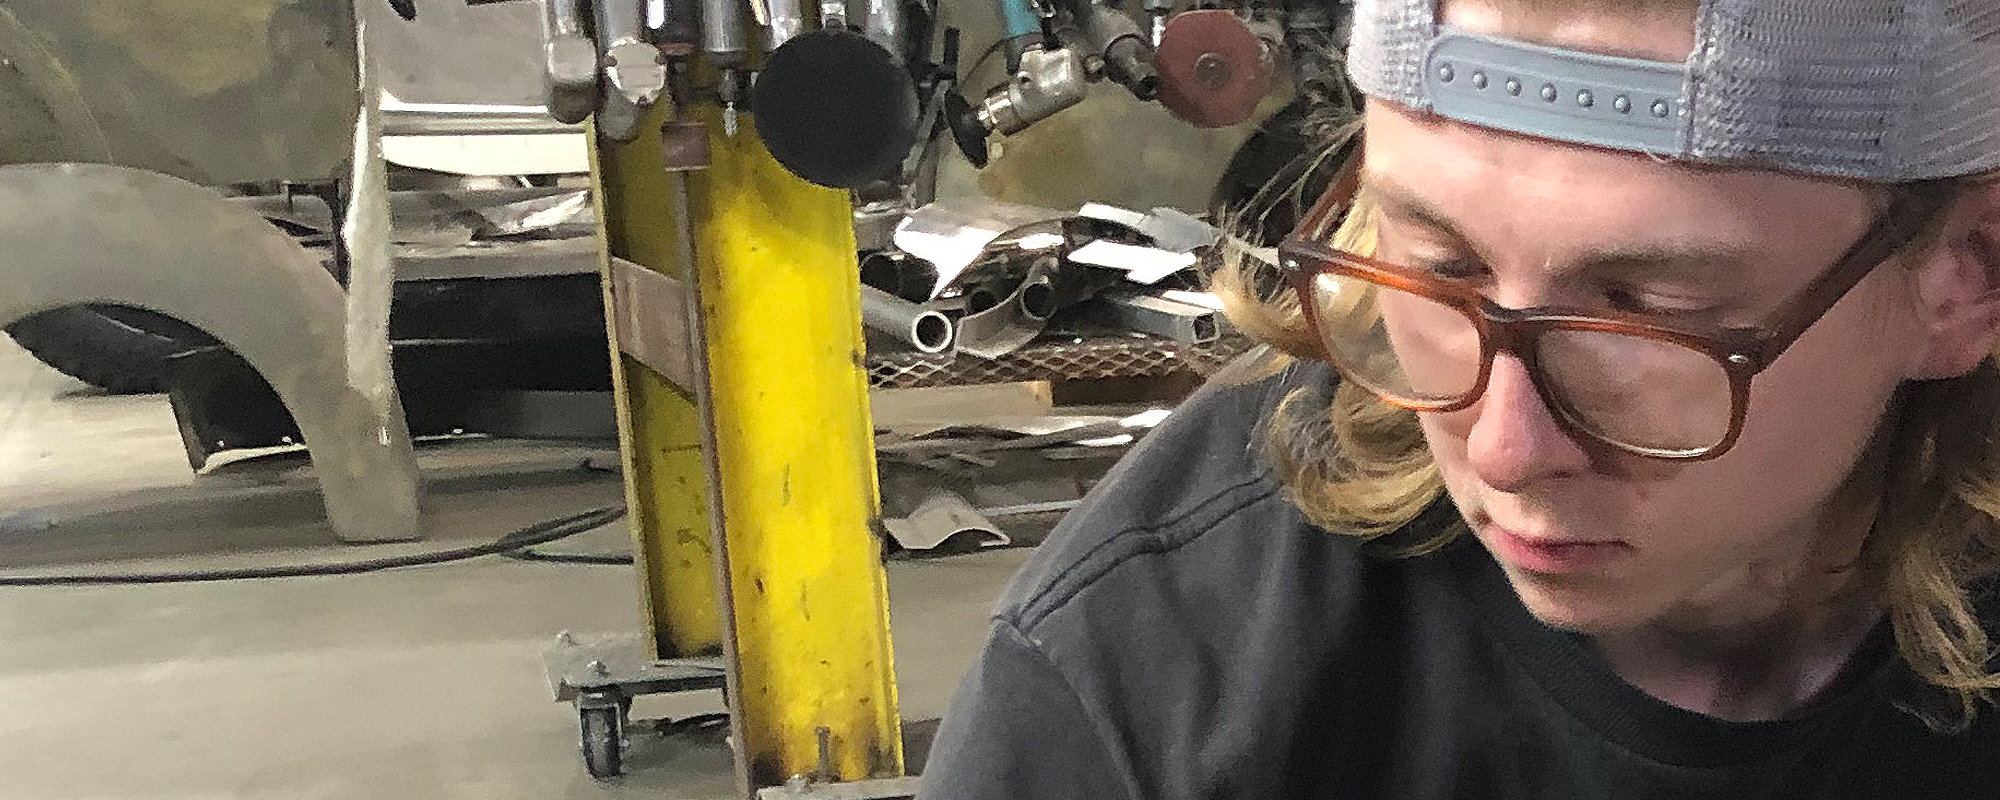 Meet Lundyn, Apprentice at Metal Union Speed Shop.